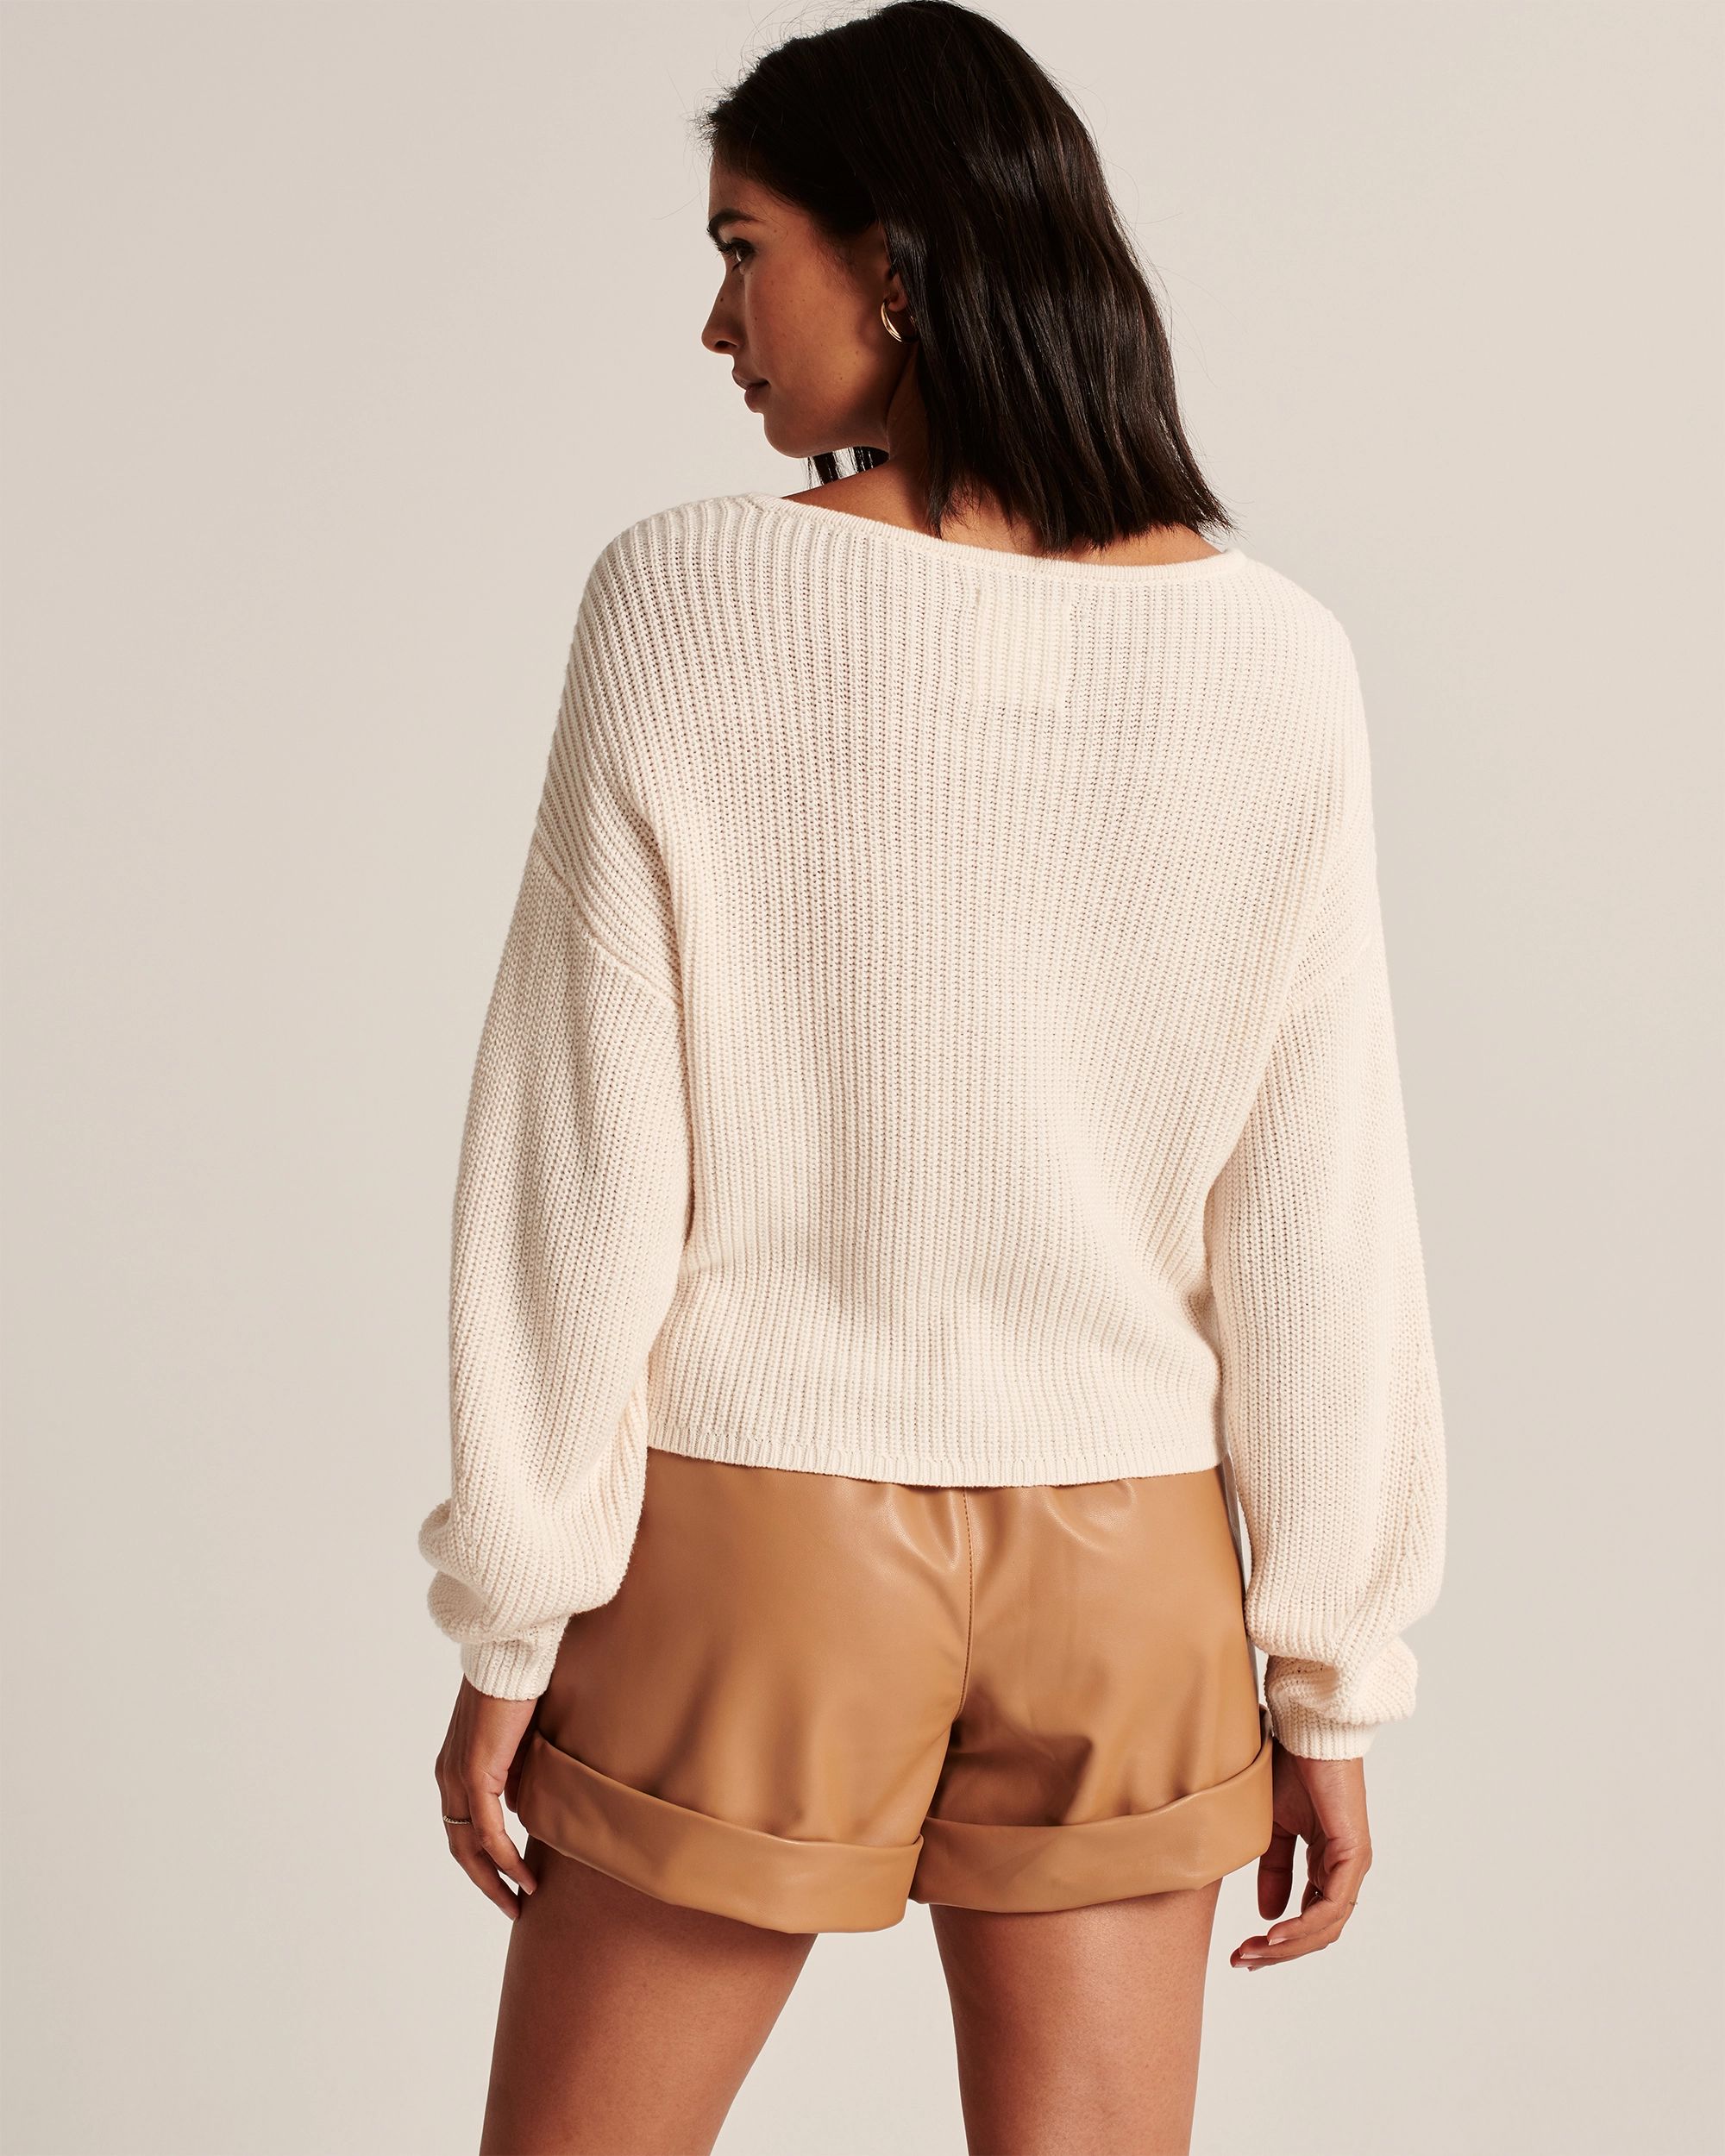 Sweetheart Neckline Sweater | Abercrombie & Fitch (US)